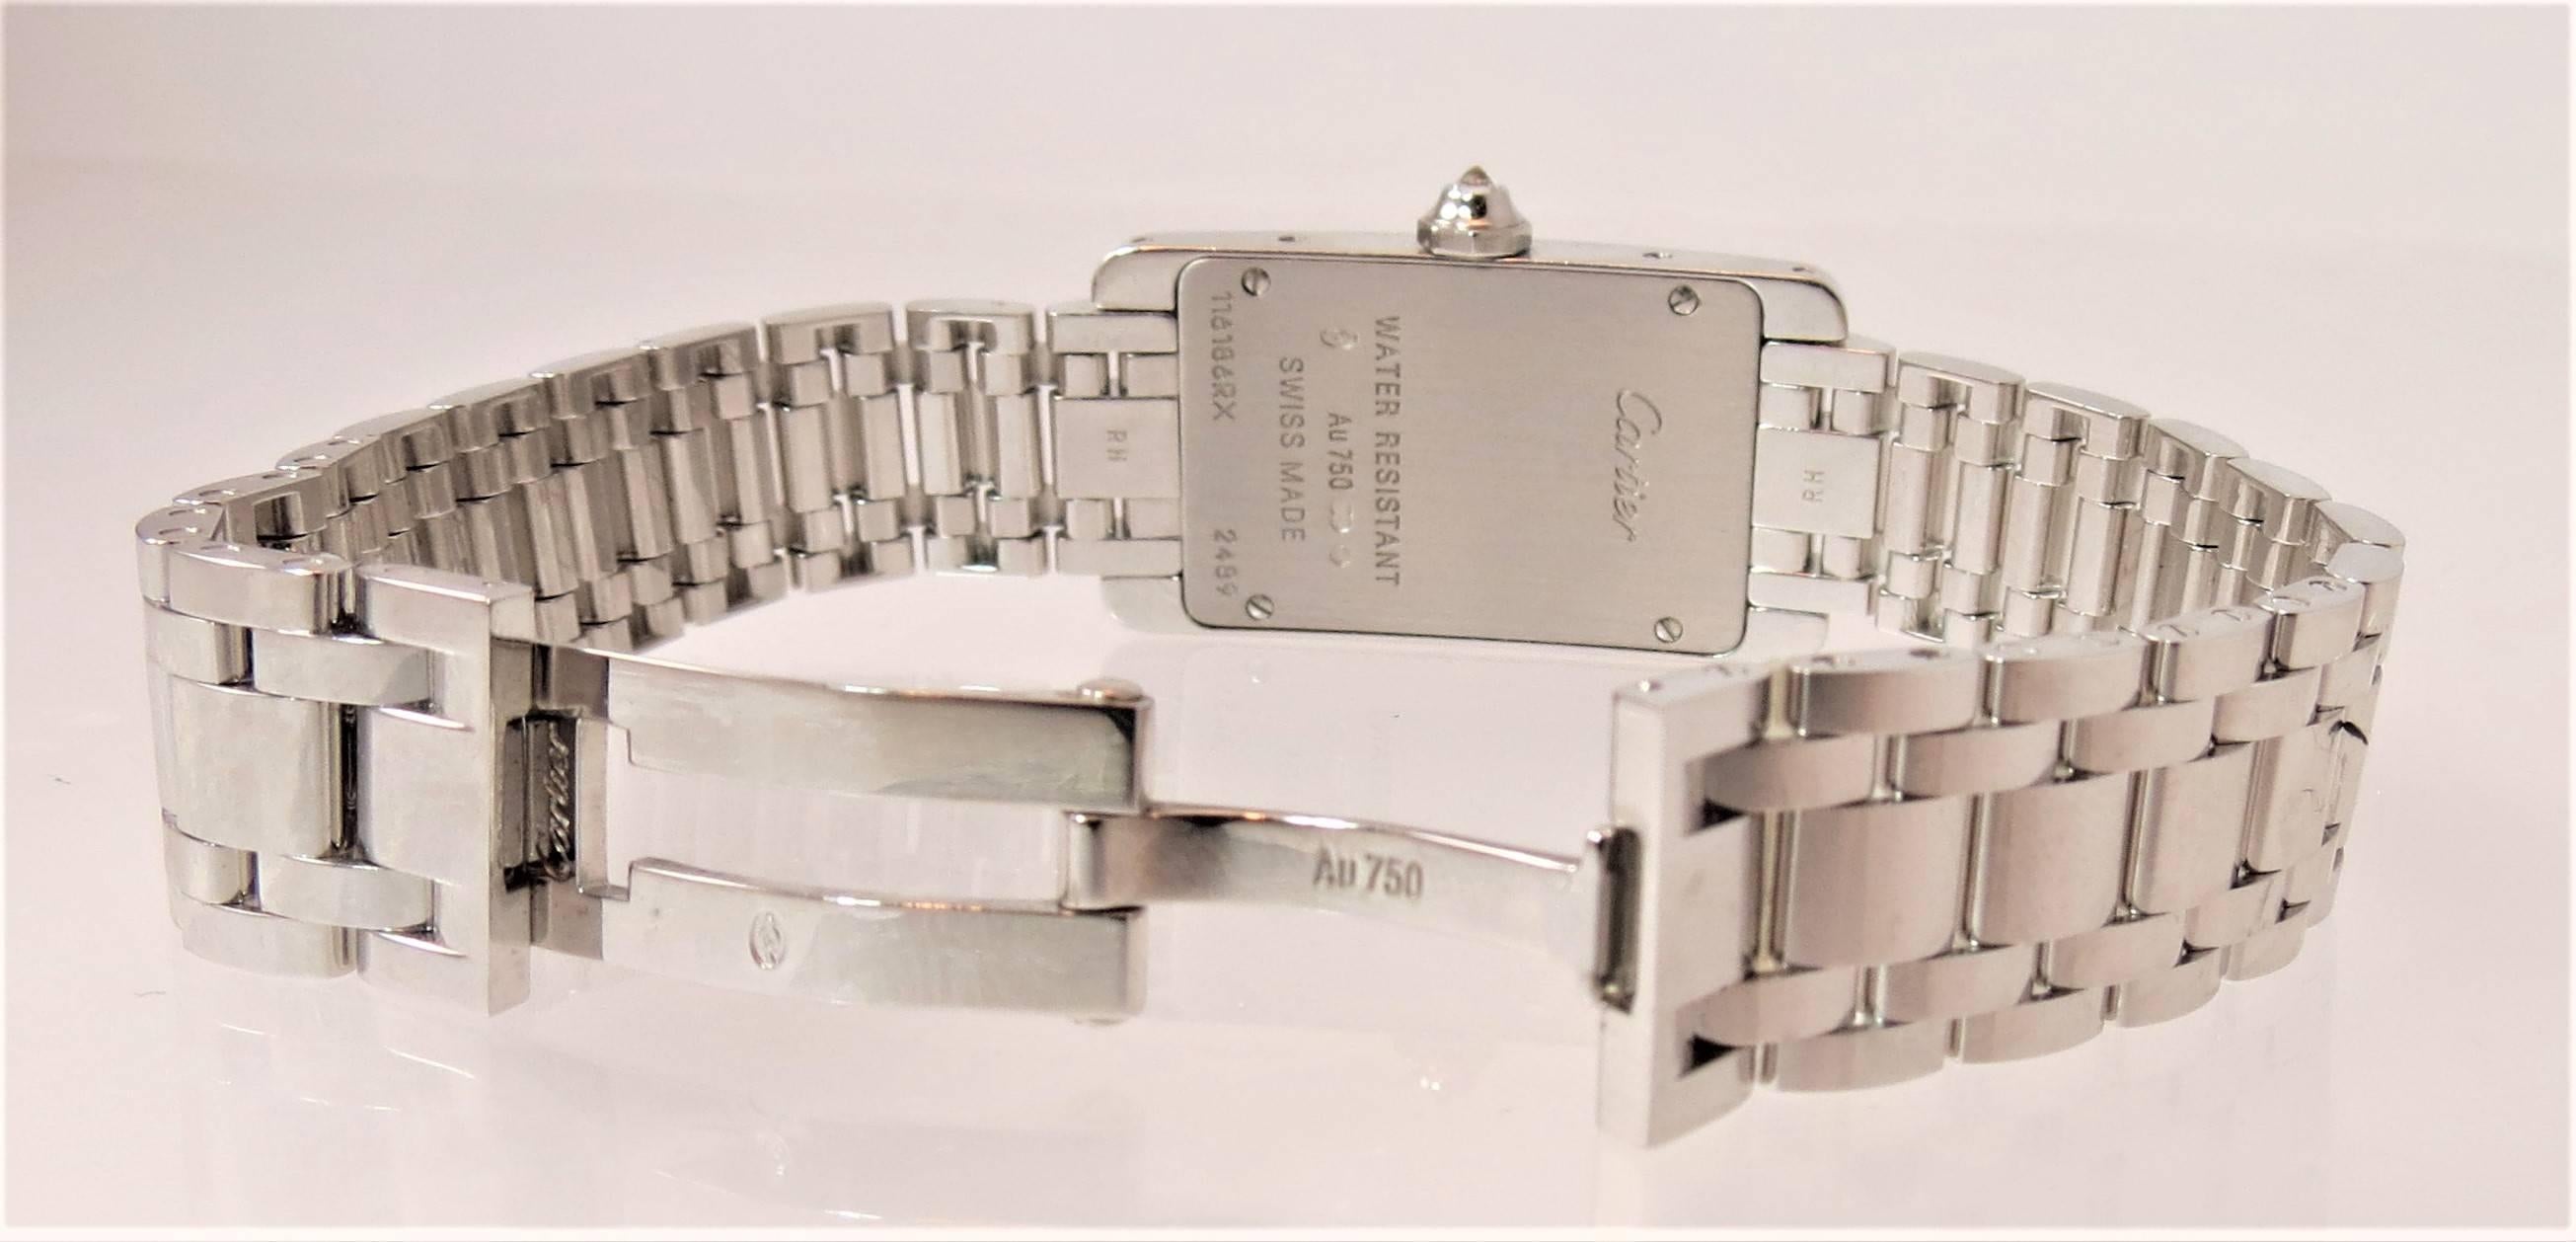 Cartier, brand new, never worn, small size, 18K white gold and diamond Tank Americaine bracelet watch, set on case with 48 full cut round diamonds weighing about 1ct, quartz movement, hidden deployant clasp.
style number WB7073L1

In original